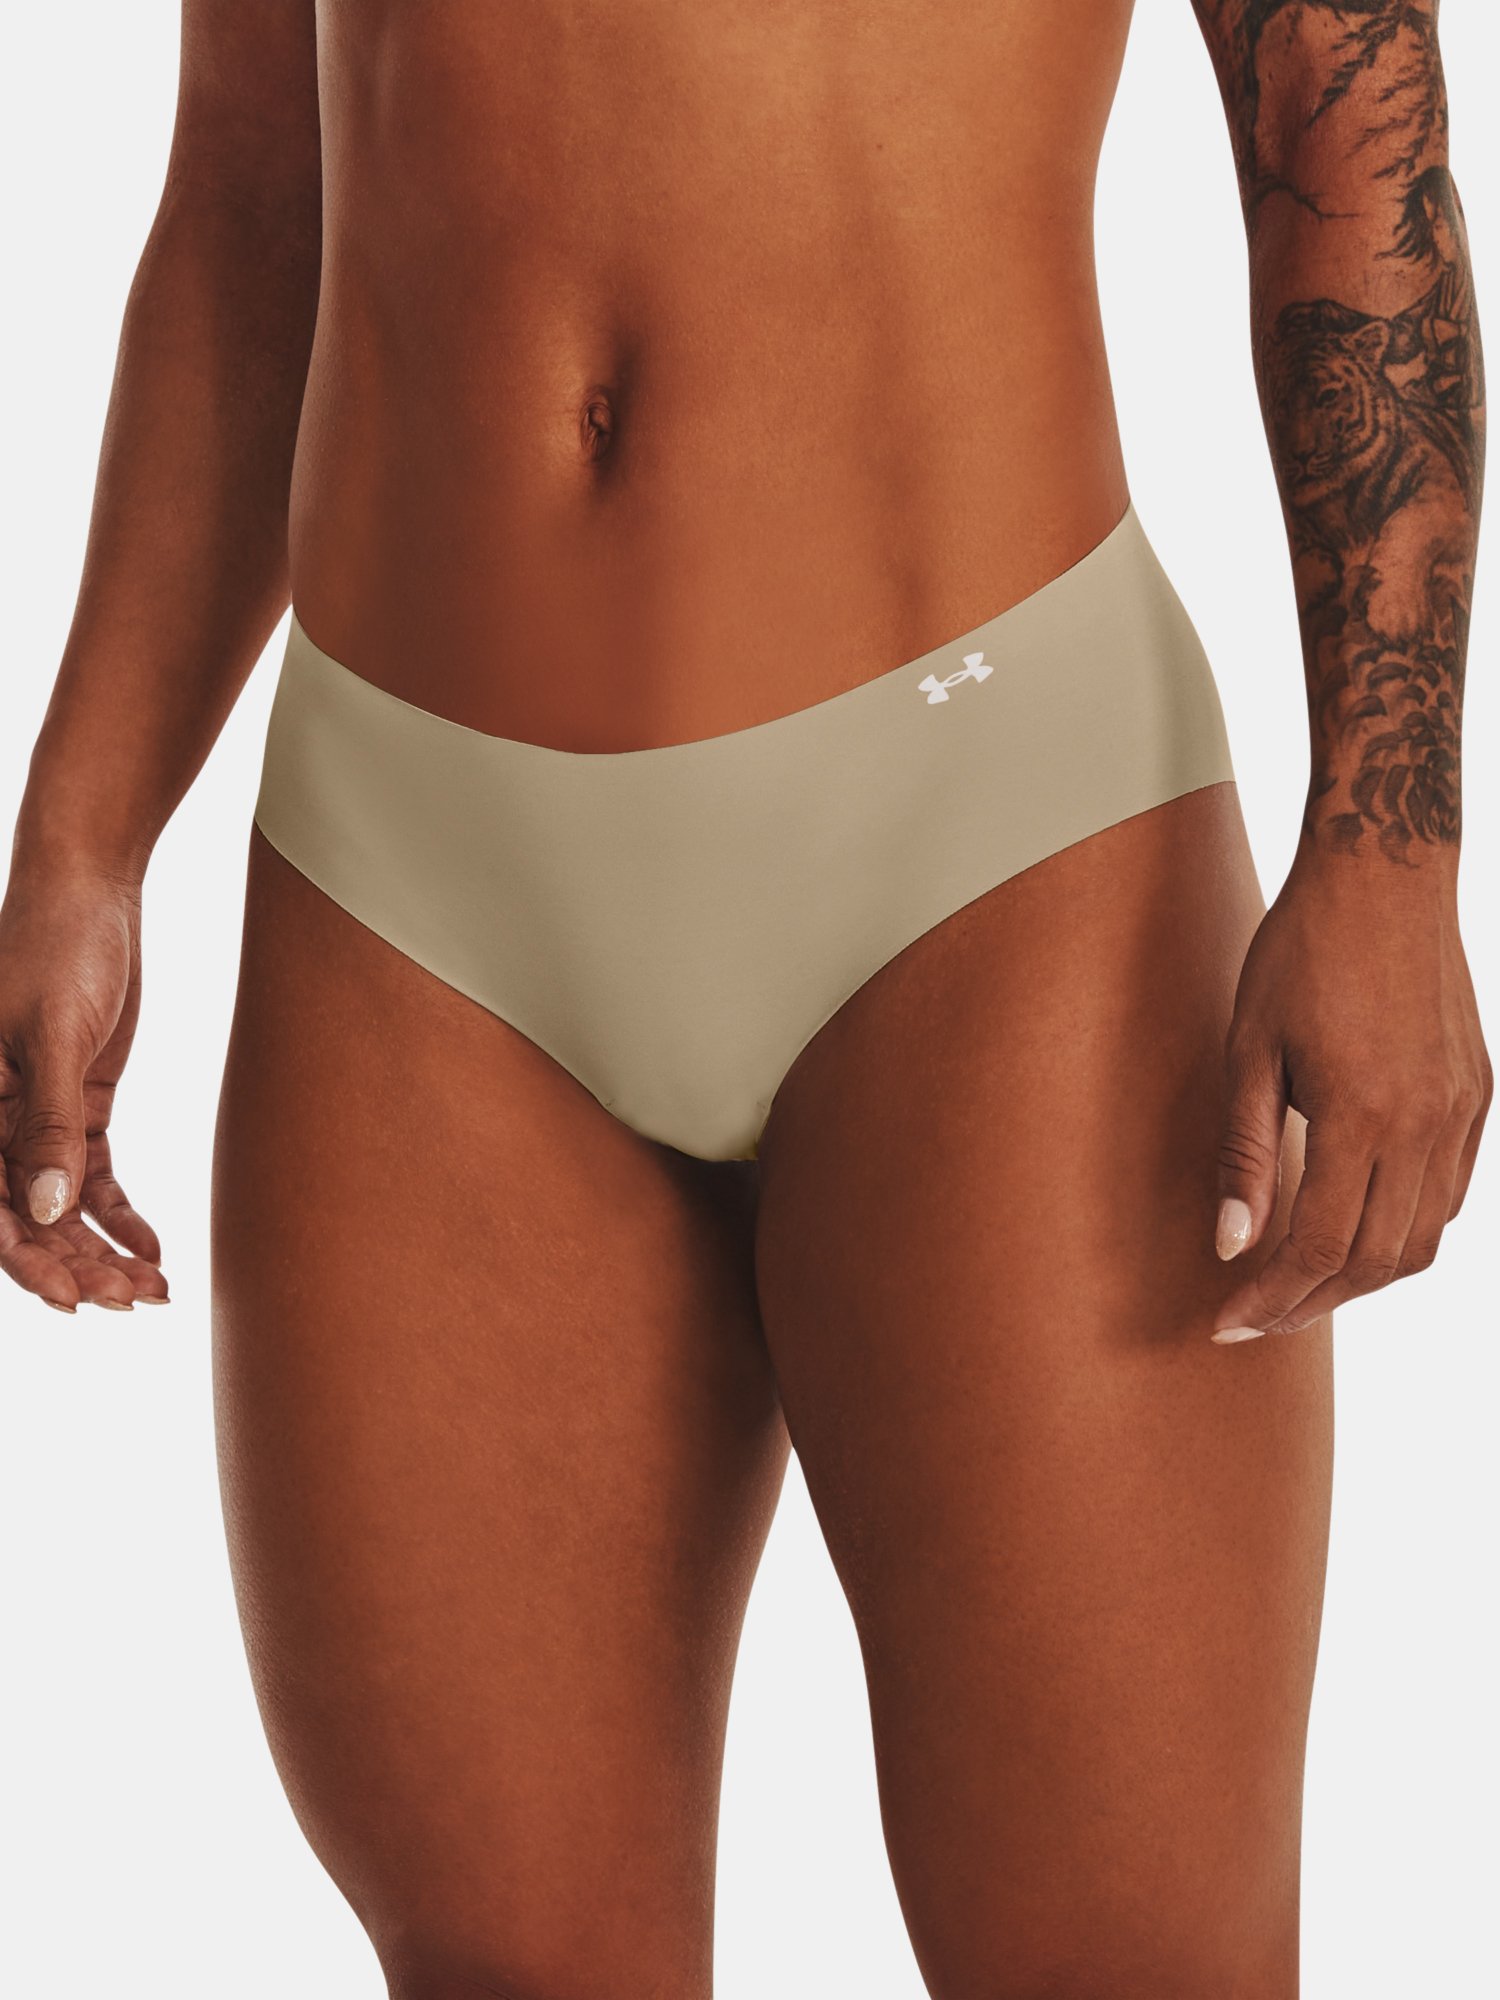 Under Armour Panties PS Hipster 3Pack-BRN - Women's